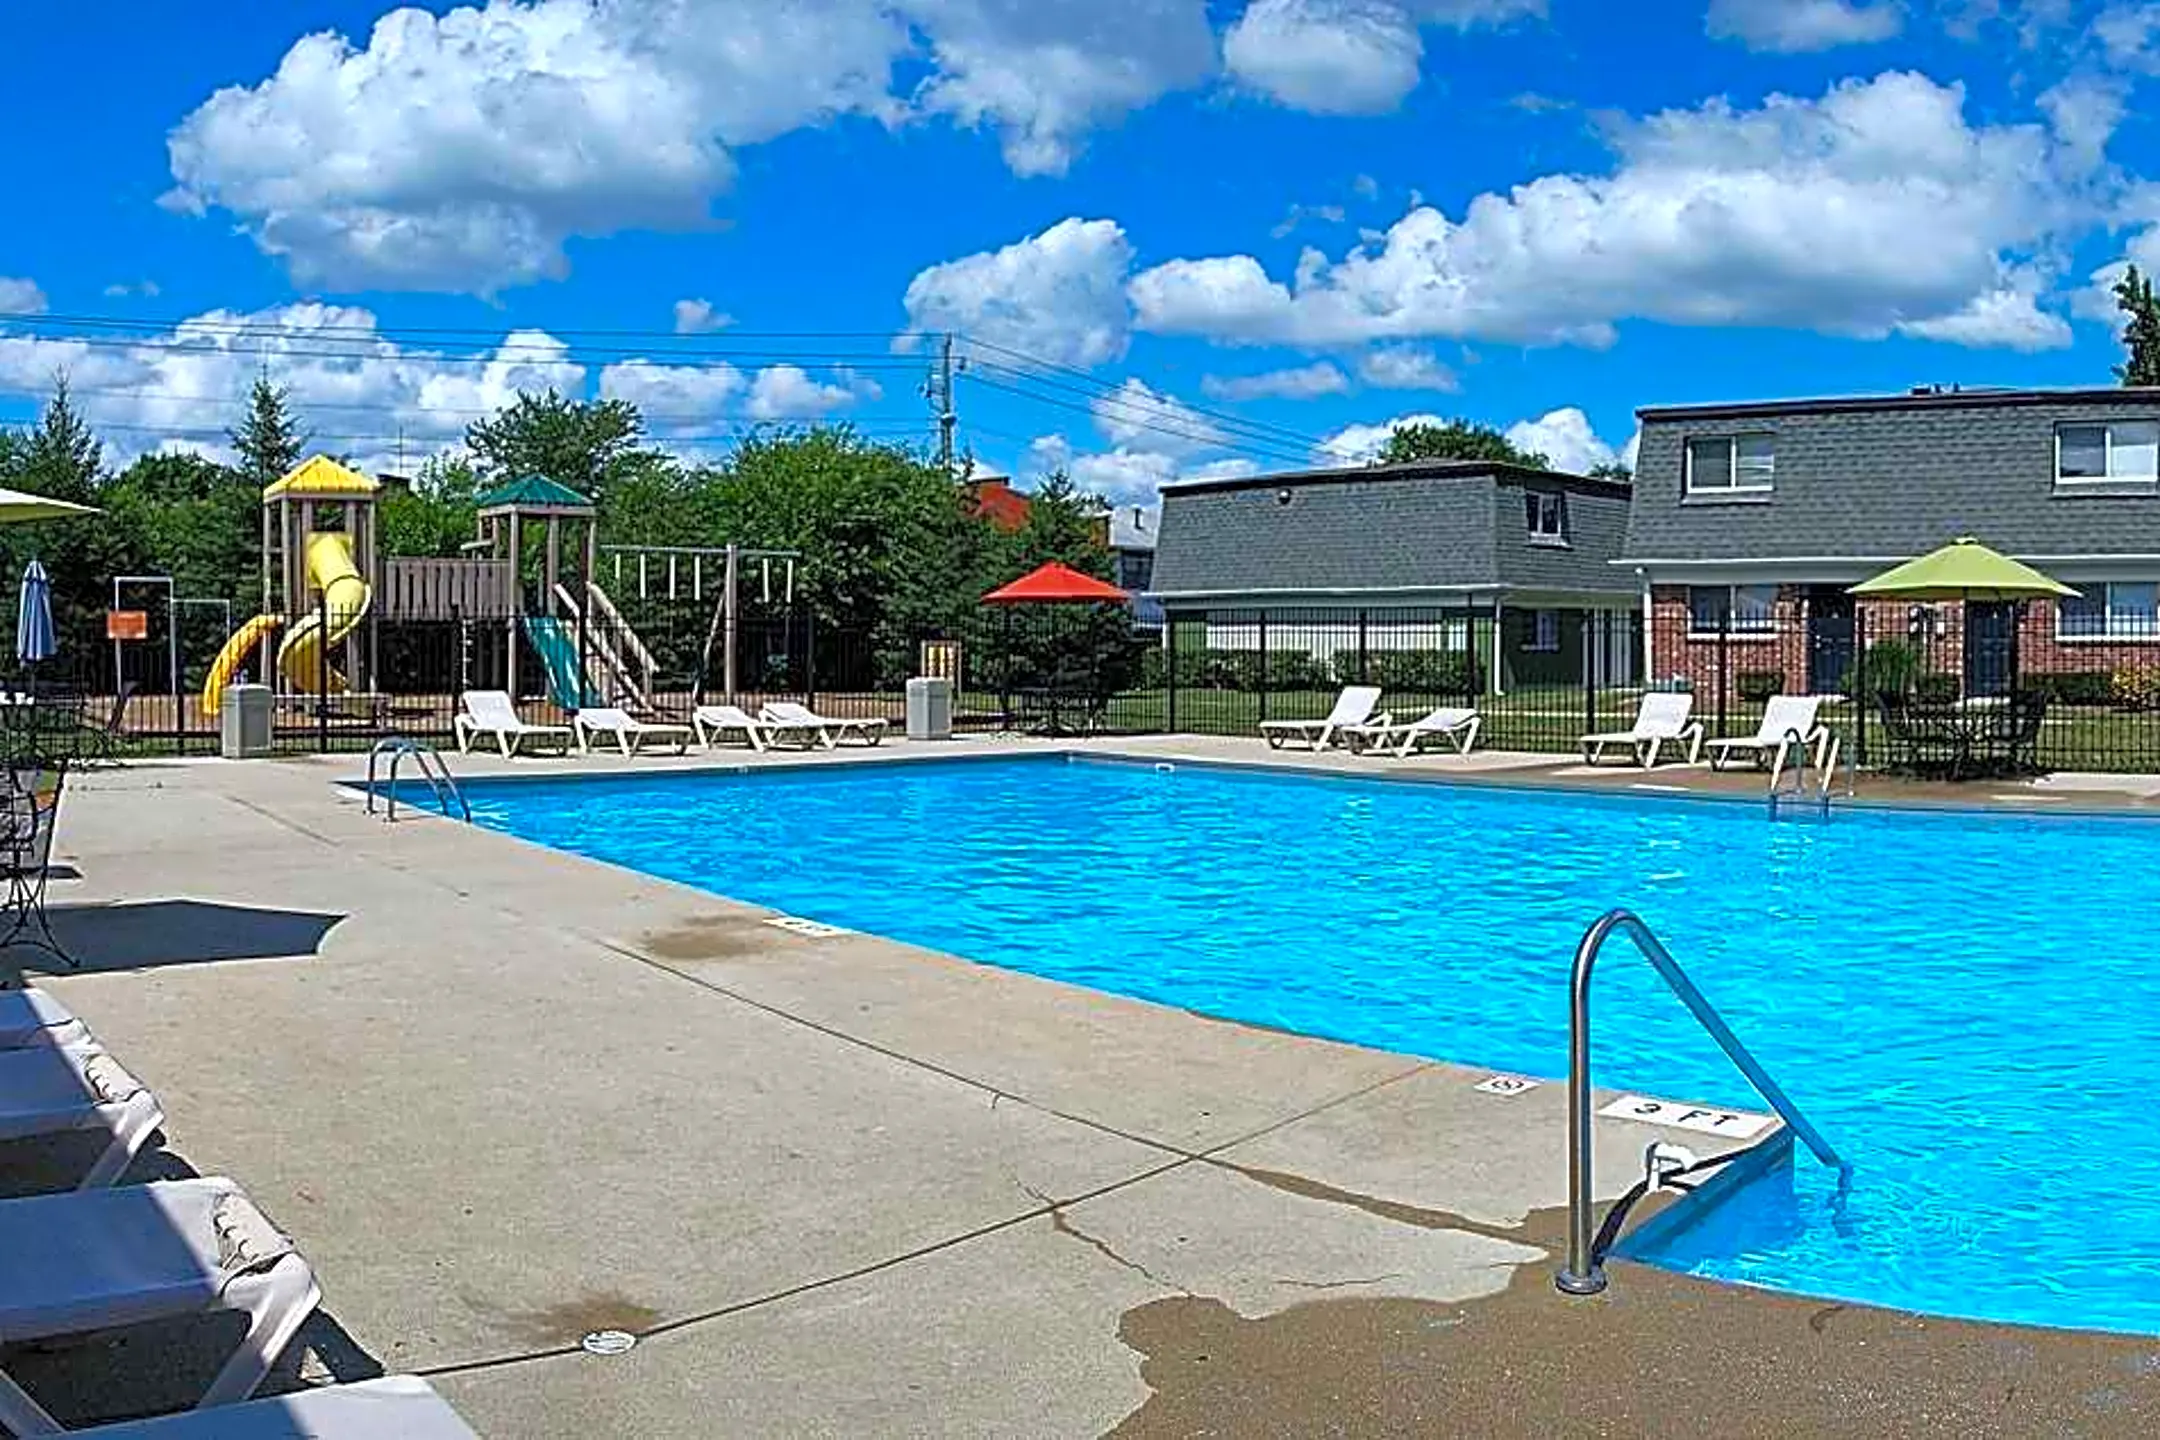 Pool - Serenity Park Apartments - Indianapolis, IN